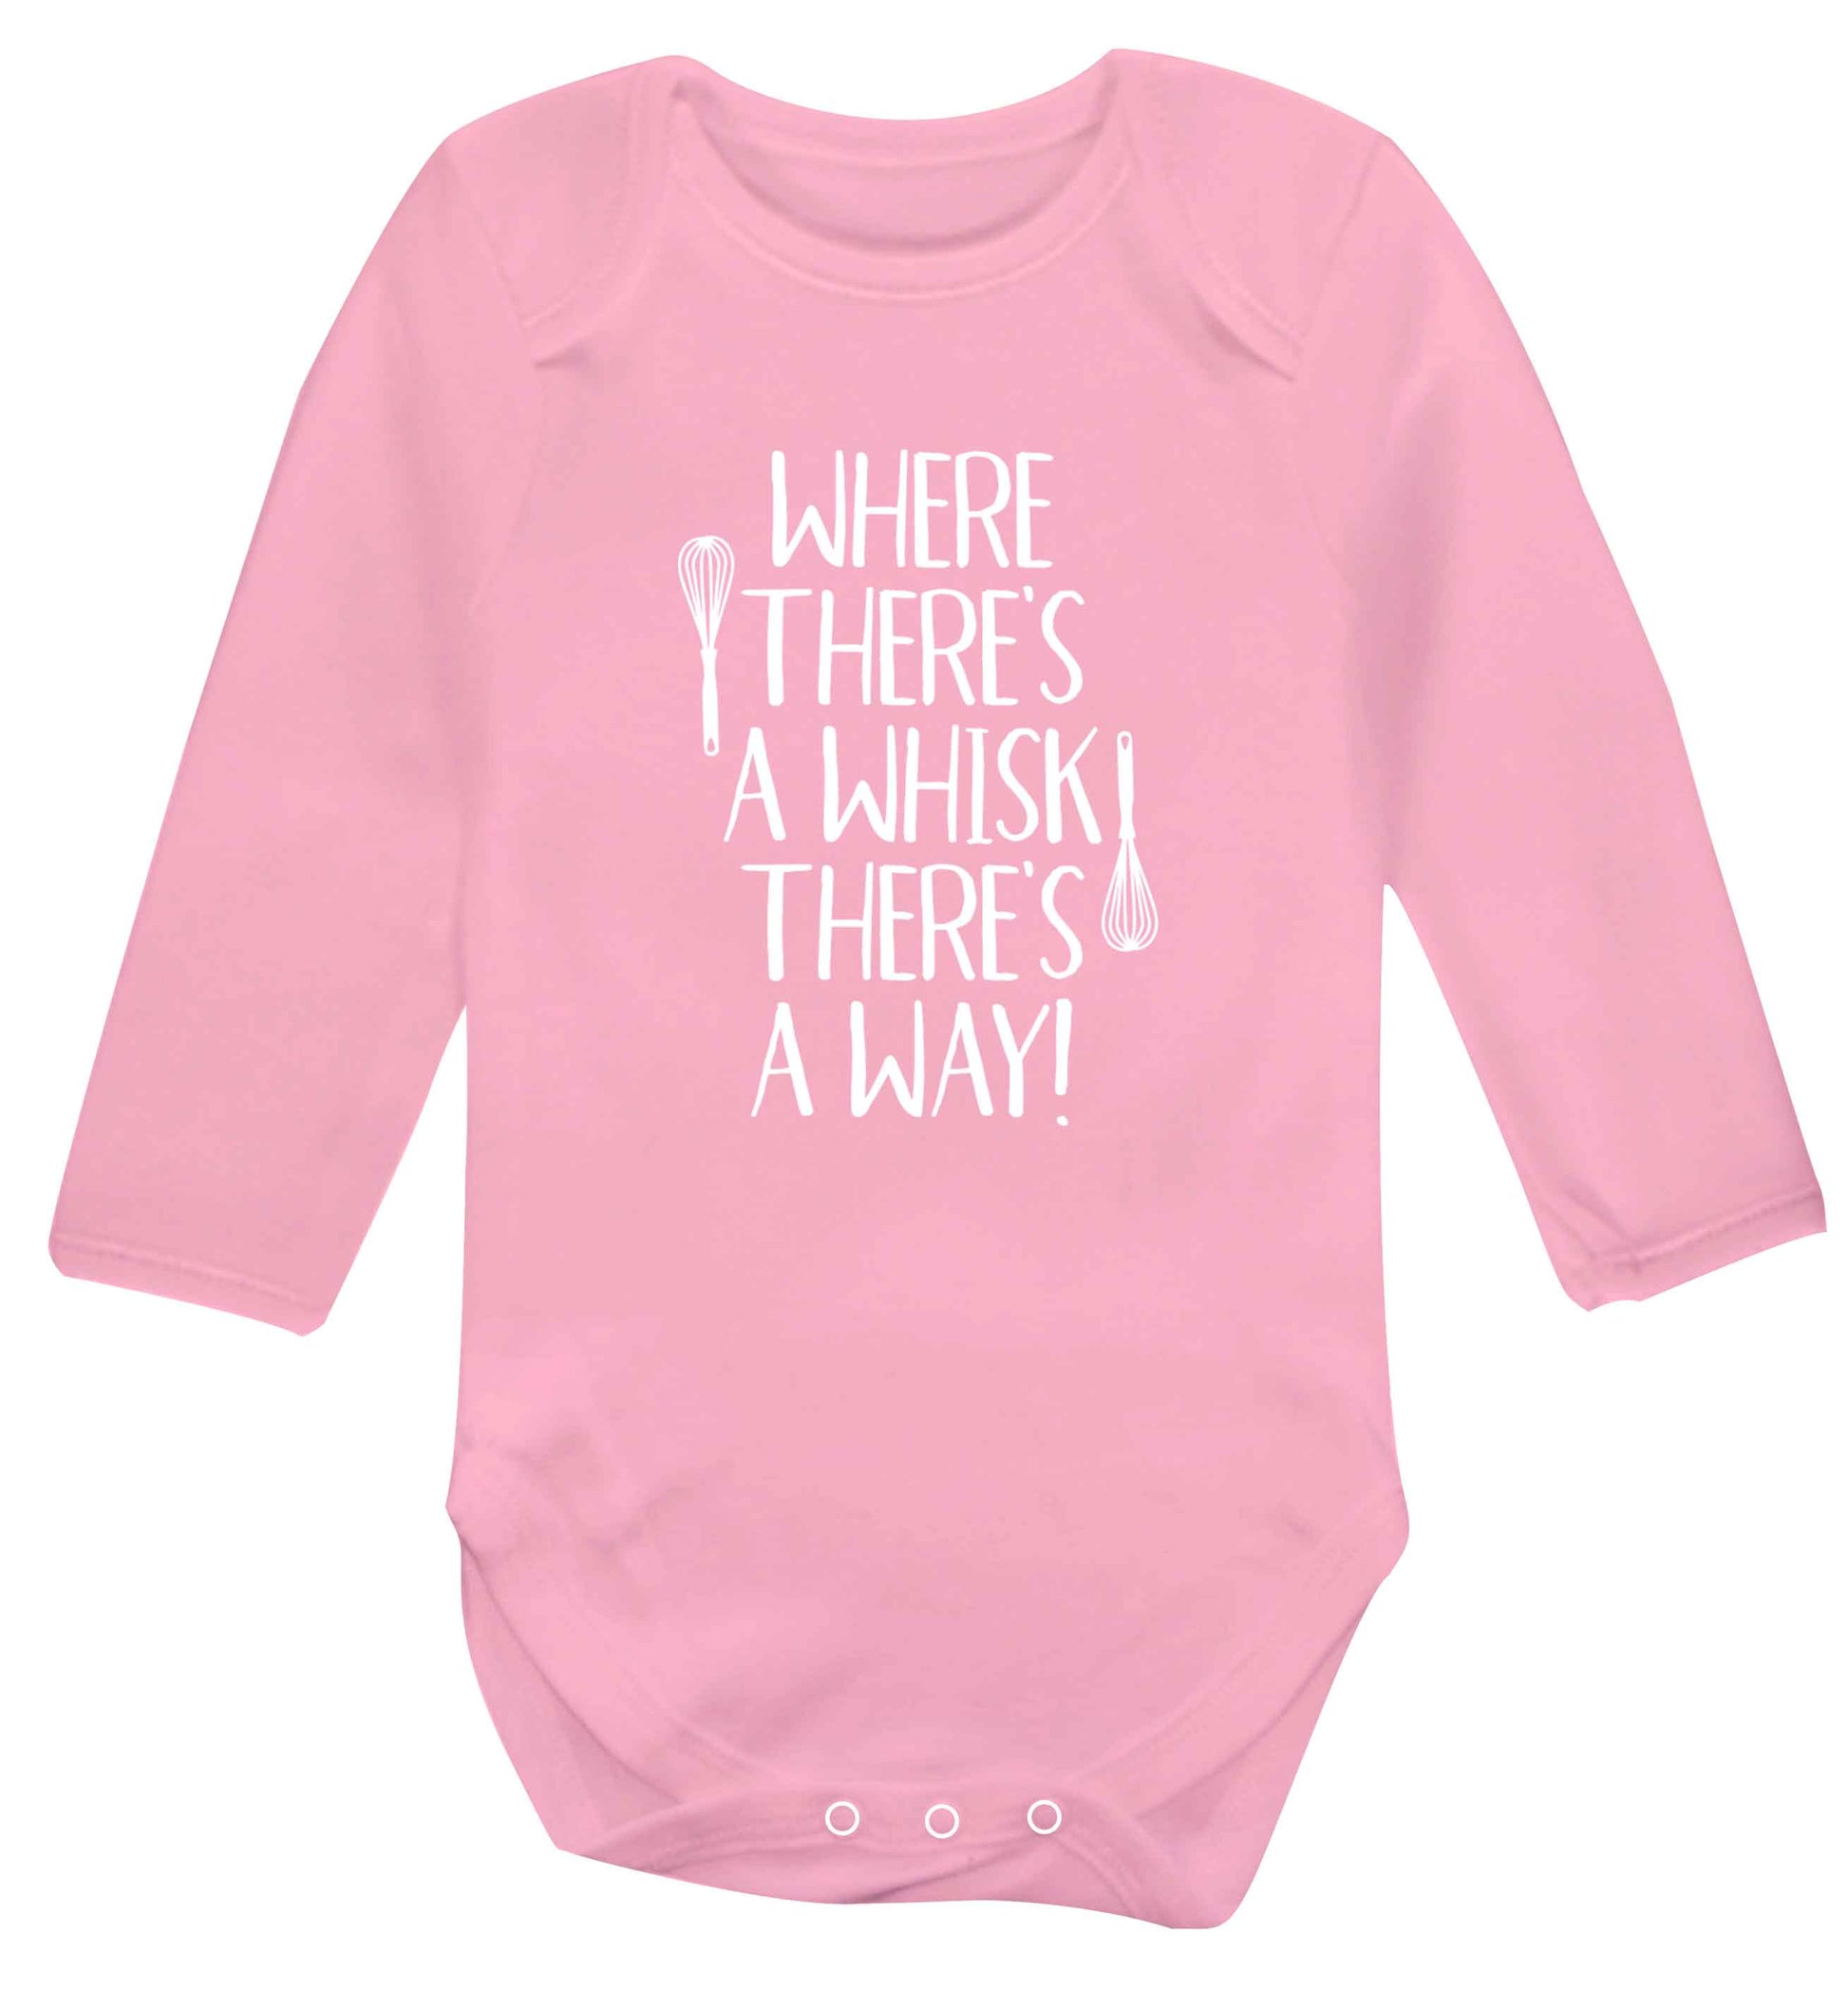 Where there's a whisk there's a way Baby Vest long sleeved pale pink 6-12 months